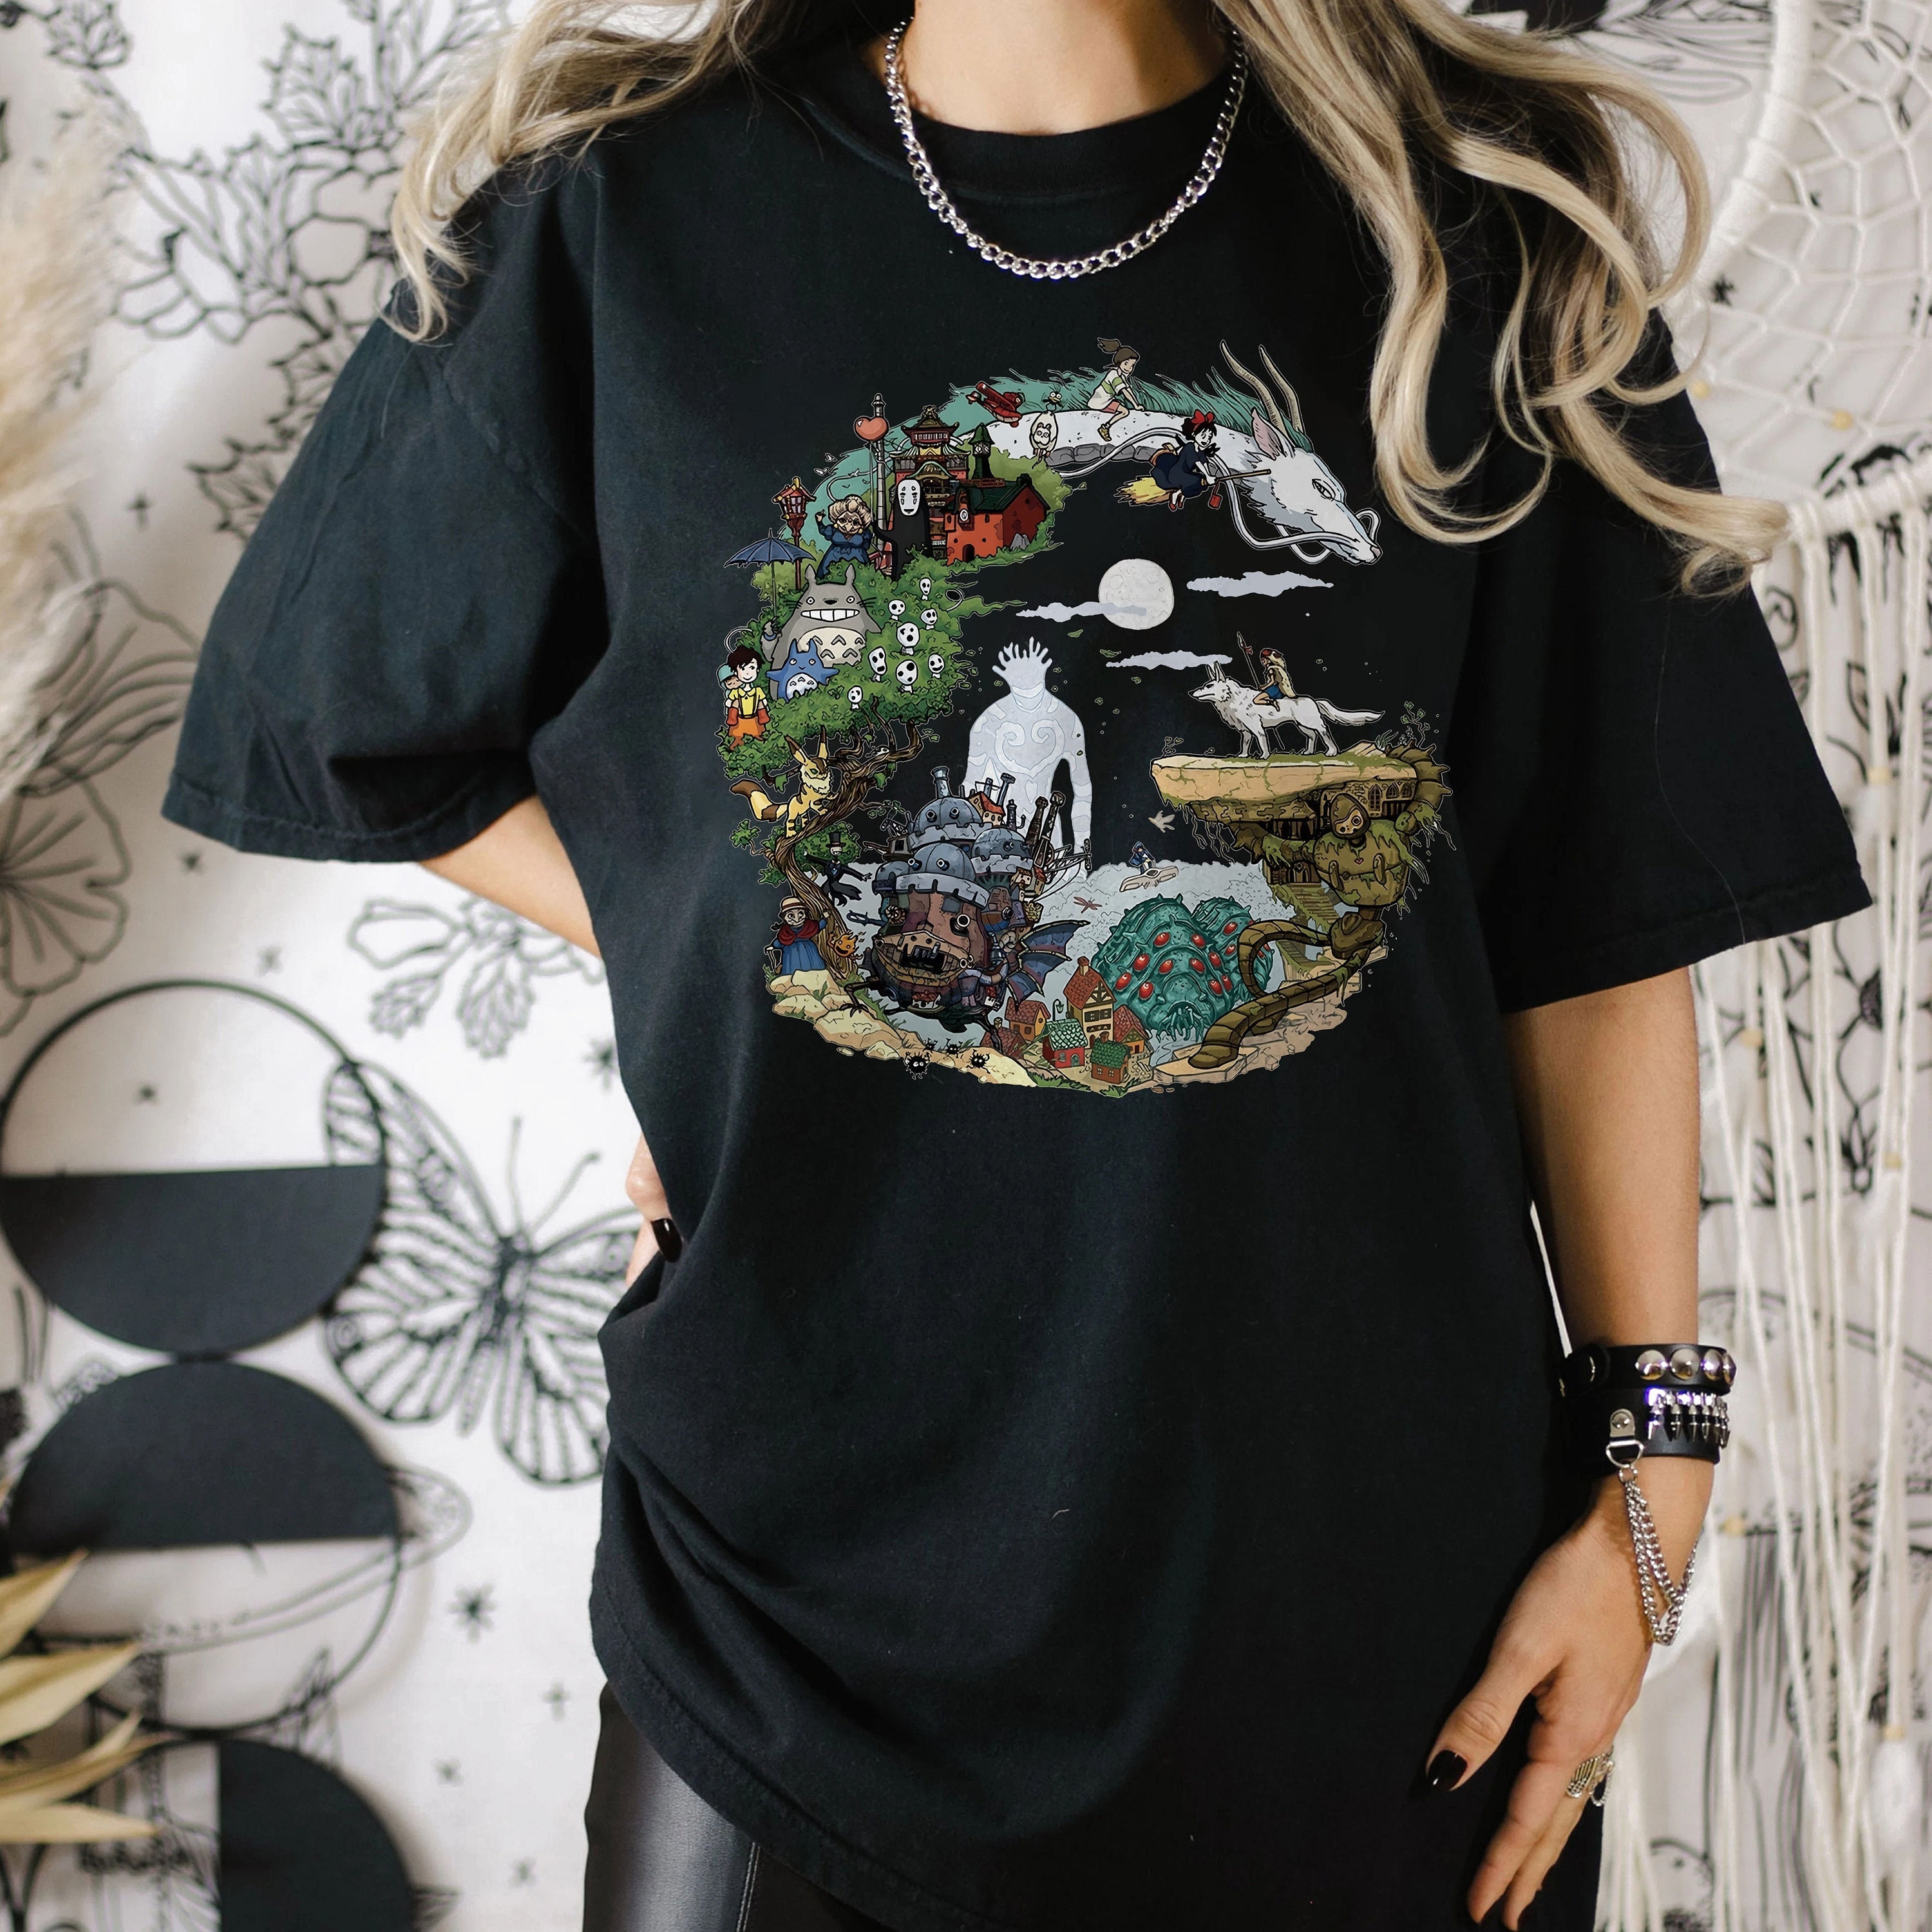 Spirited Away - Sen and Friends by the Bathhouse T Shirt